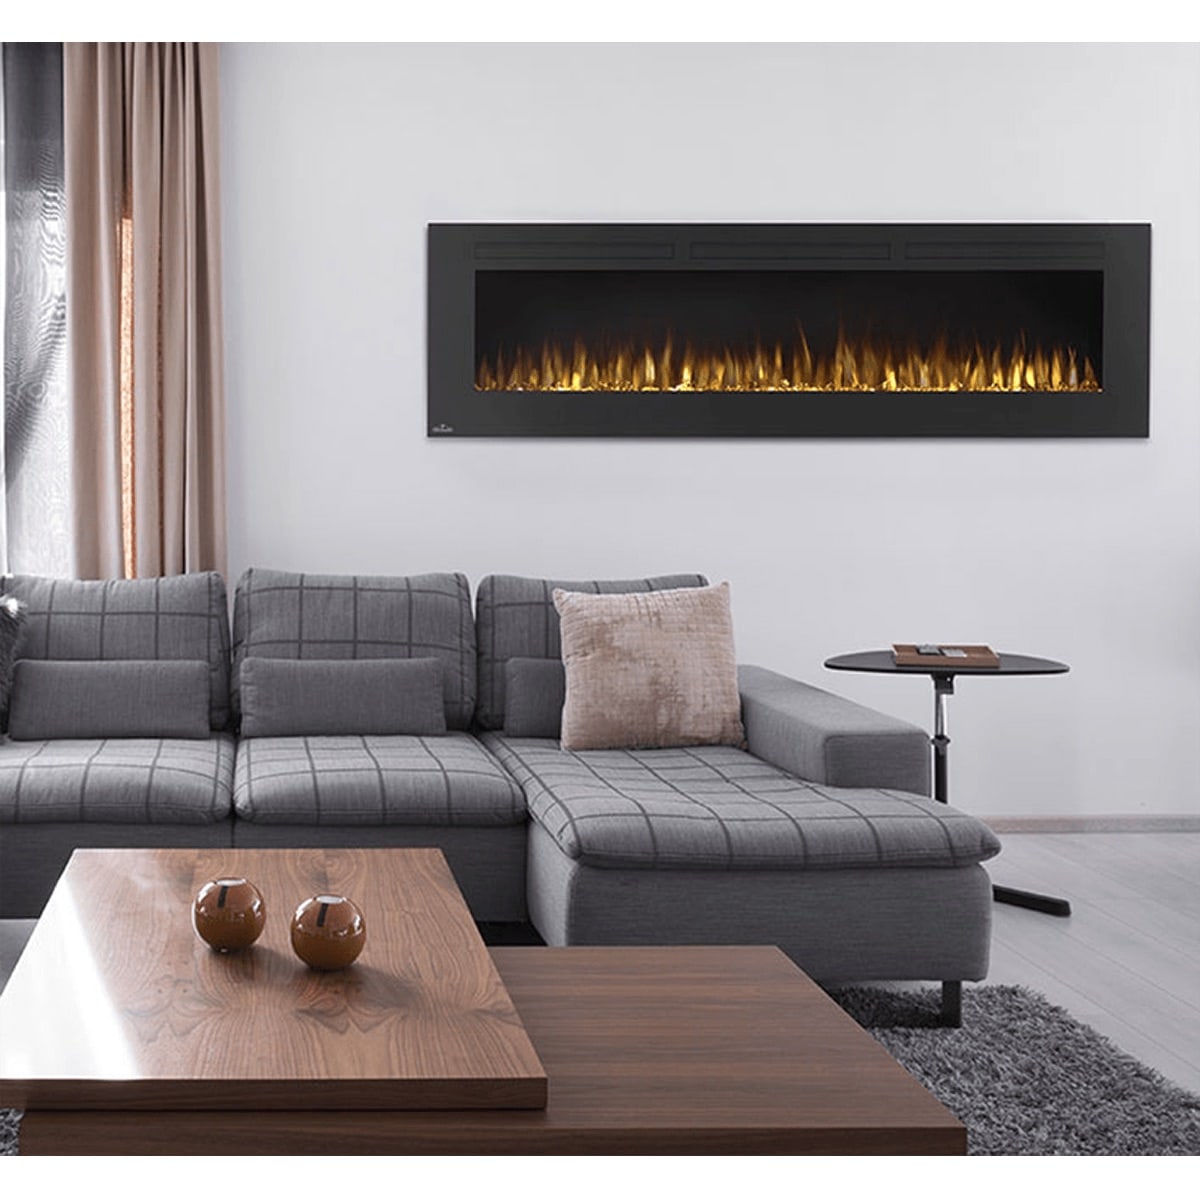 Fake Fireplaces Sale Best Of Electric Fireplaces Buying Guide Free Shipping